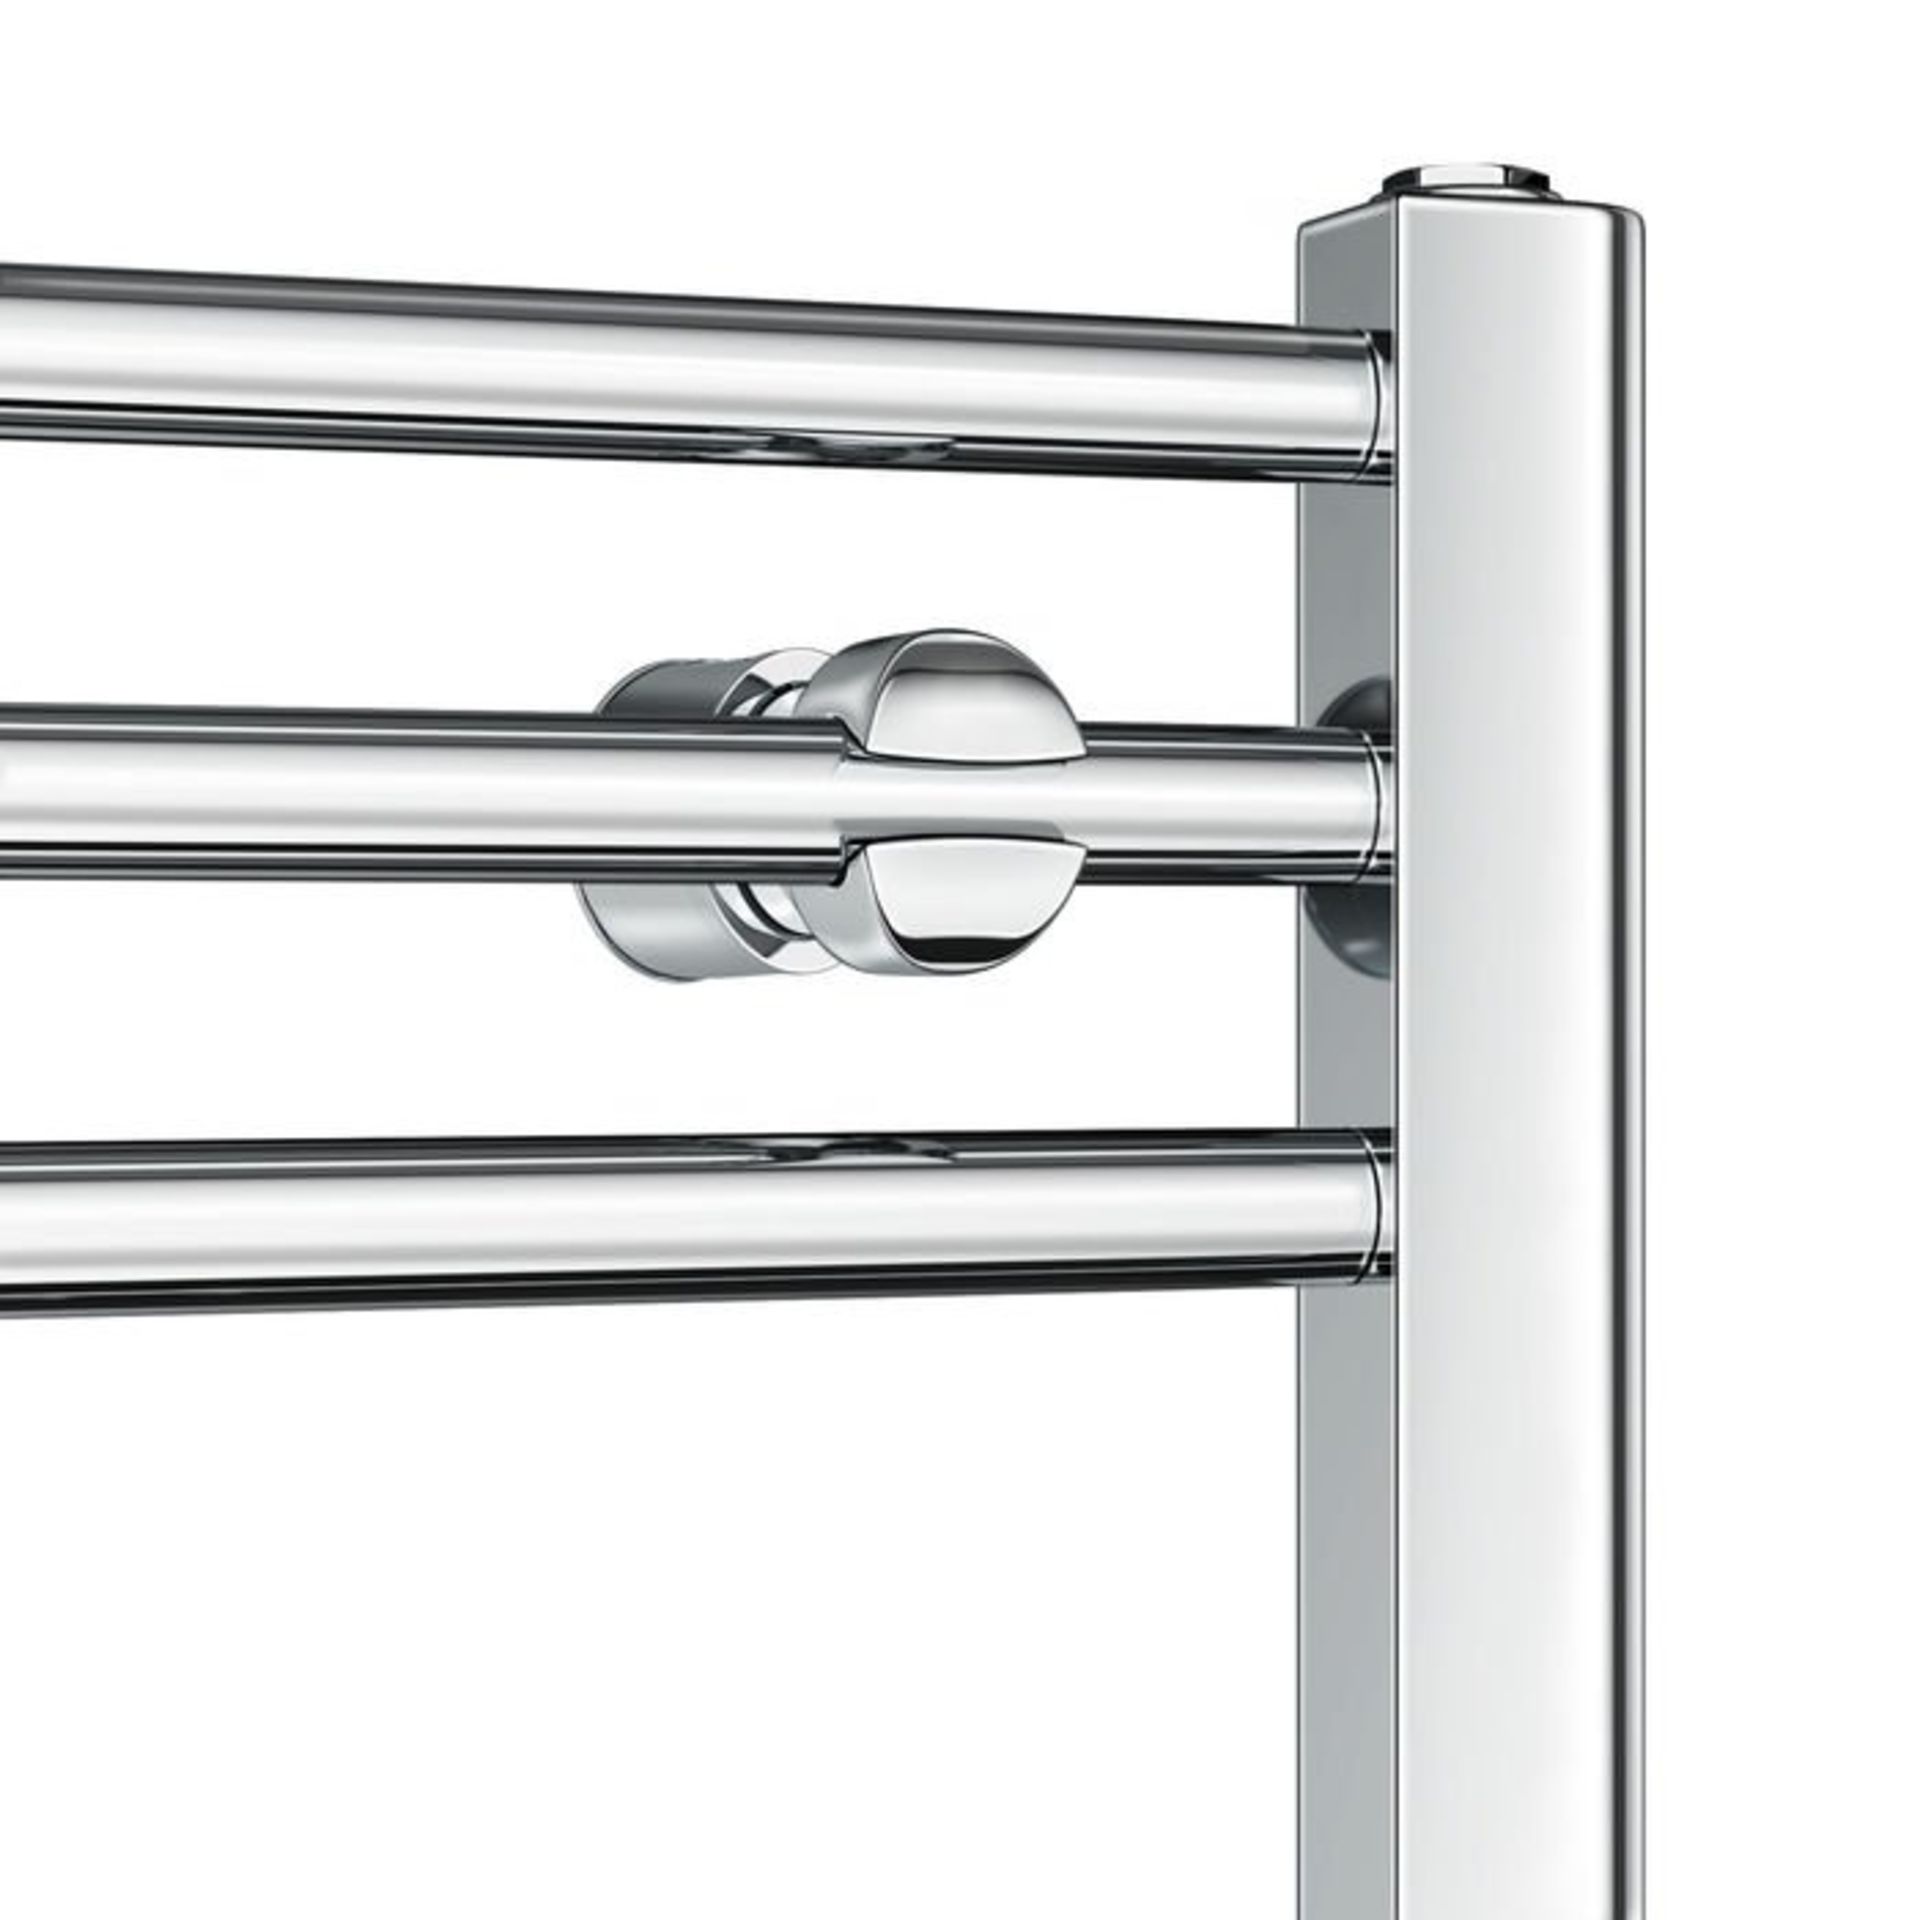 (H4) 1600x400mm - 20mm Tubes - Chrome Heated Straight Rail Ladder Towel Radiator. Low carbon steel - Image 3 of 5